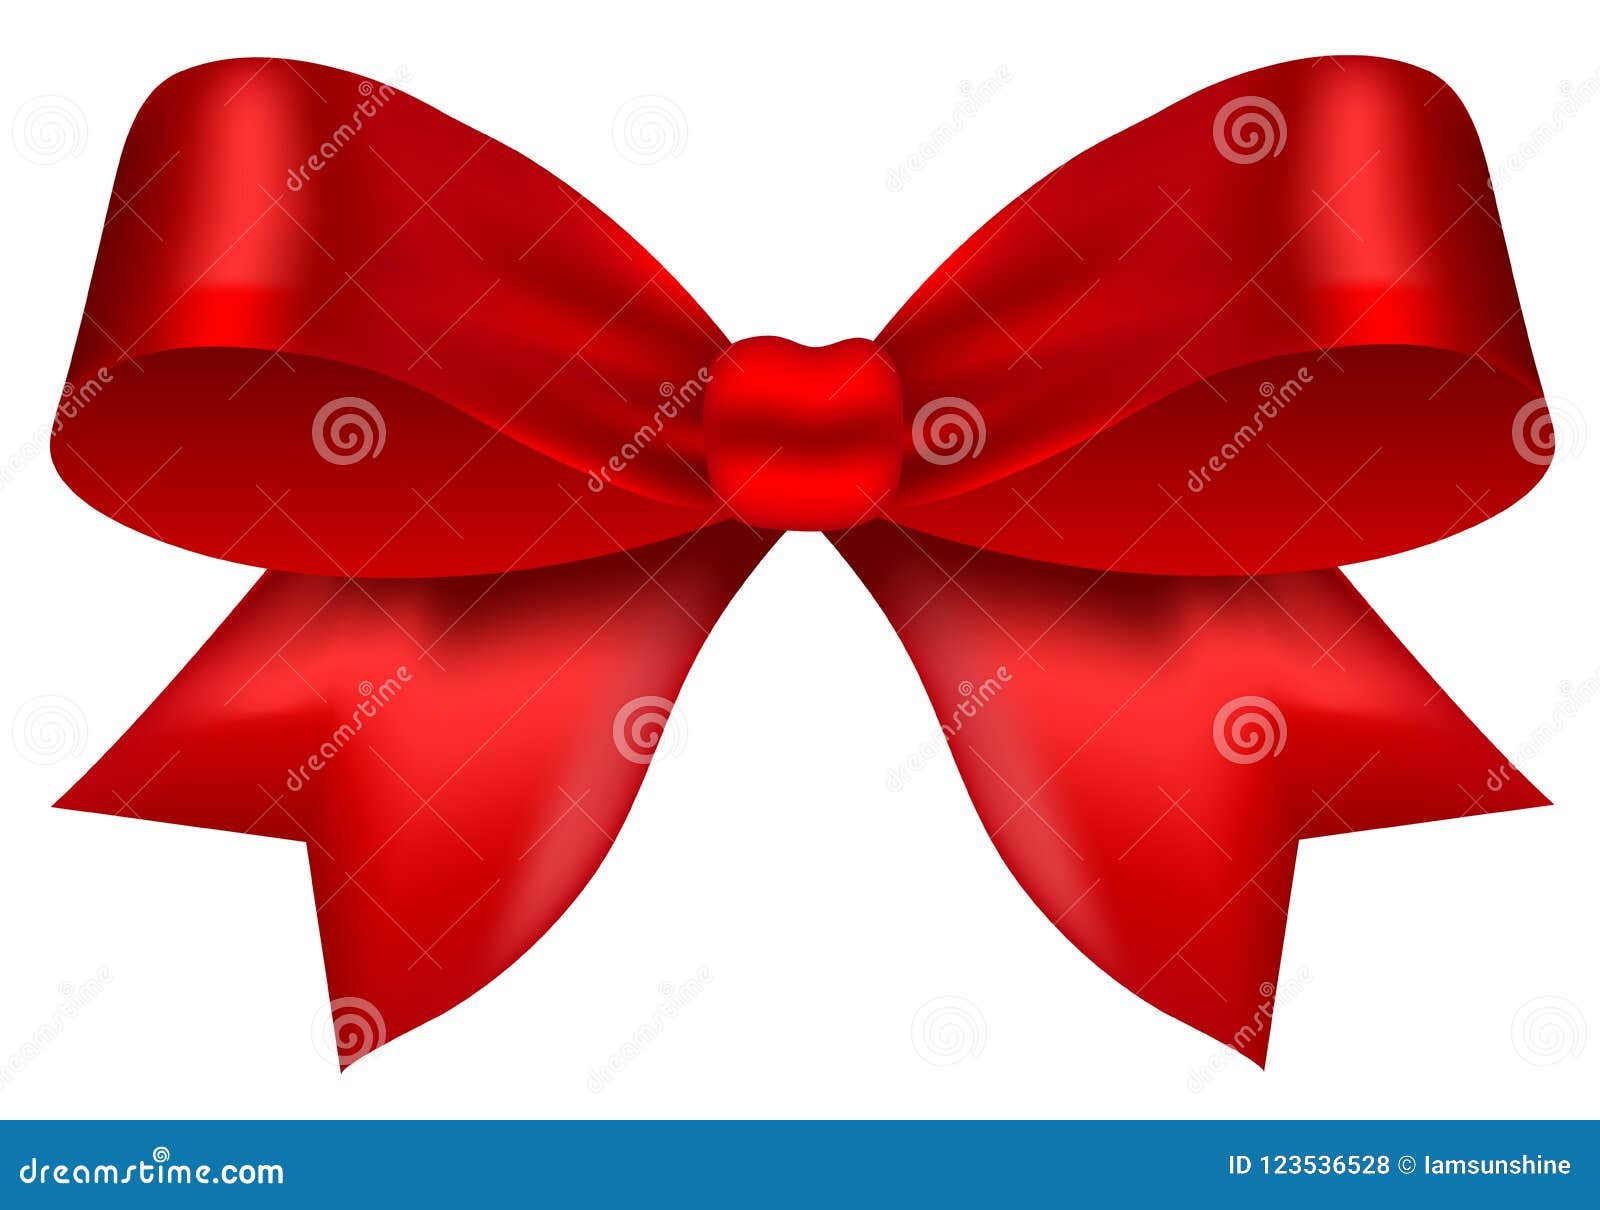 Cute ribbon banners stock vector. Illustration of card - 109820645